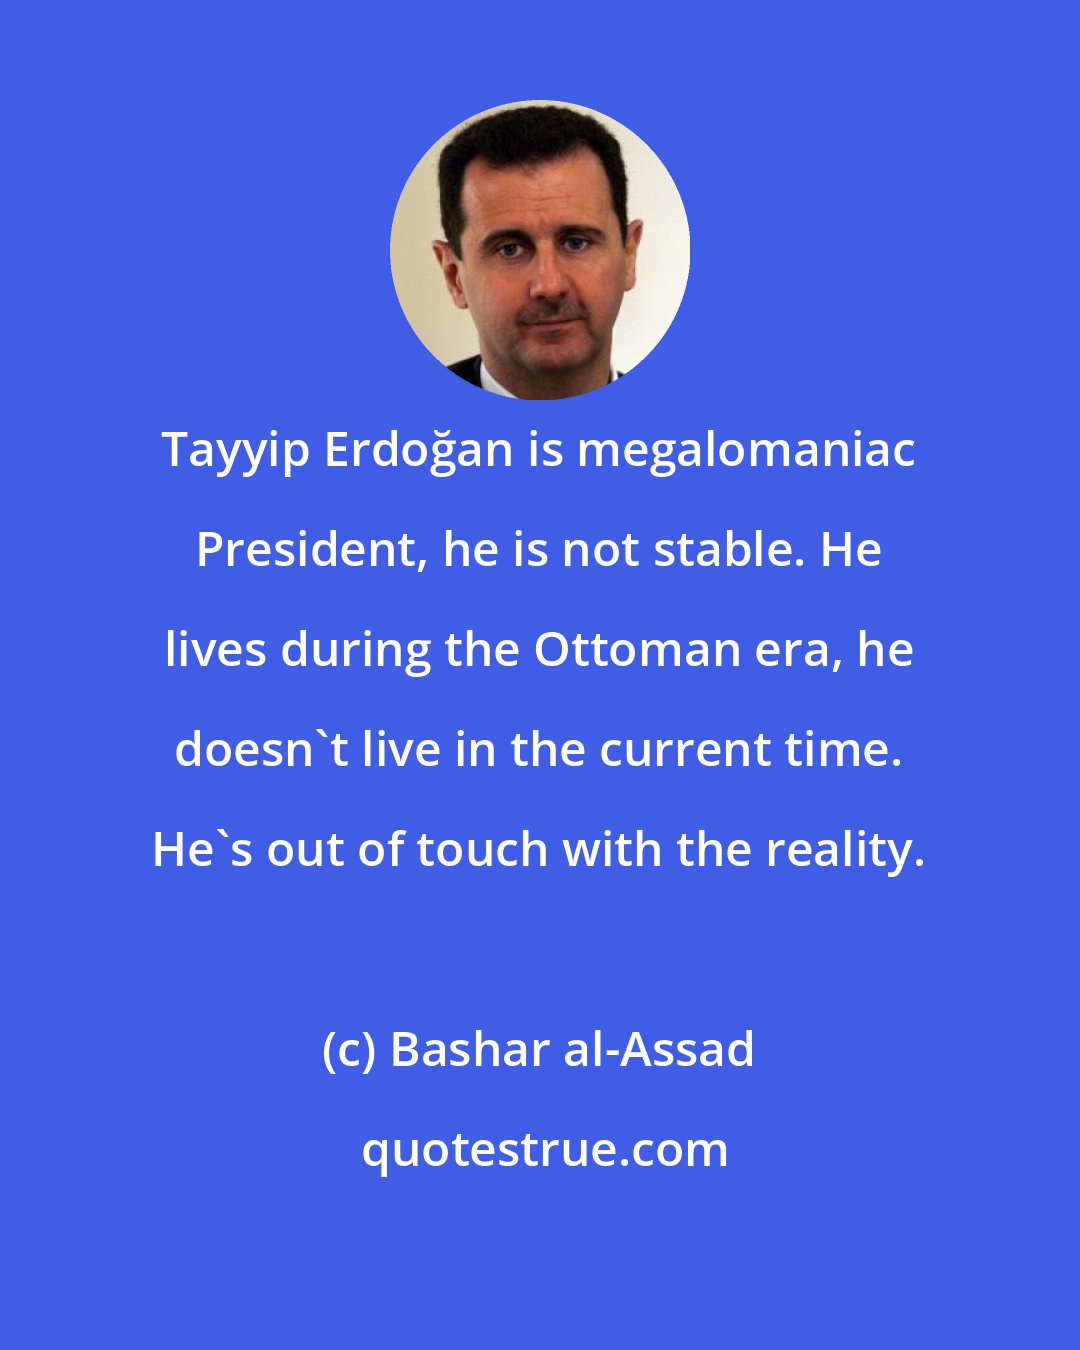 Bashar al-Assad: Tayyip Erdoğan is megalomaniac President, he is not stable. He lives during the Ottoman era, he doesn't live in the current time. He's out of touch with the reality.